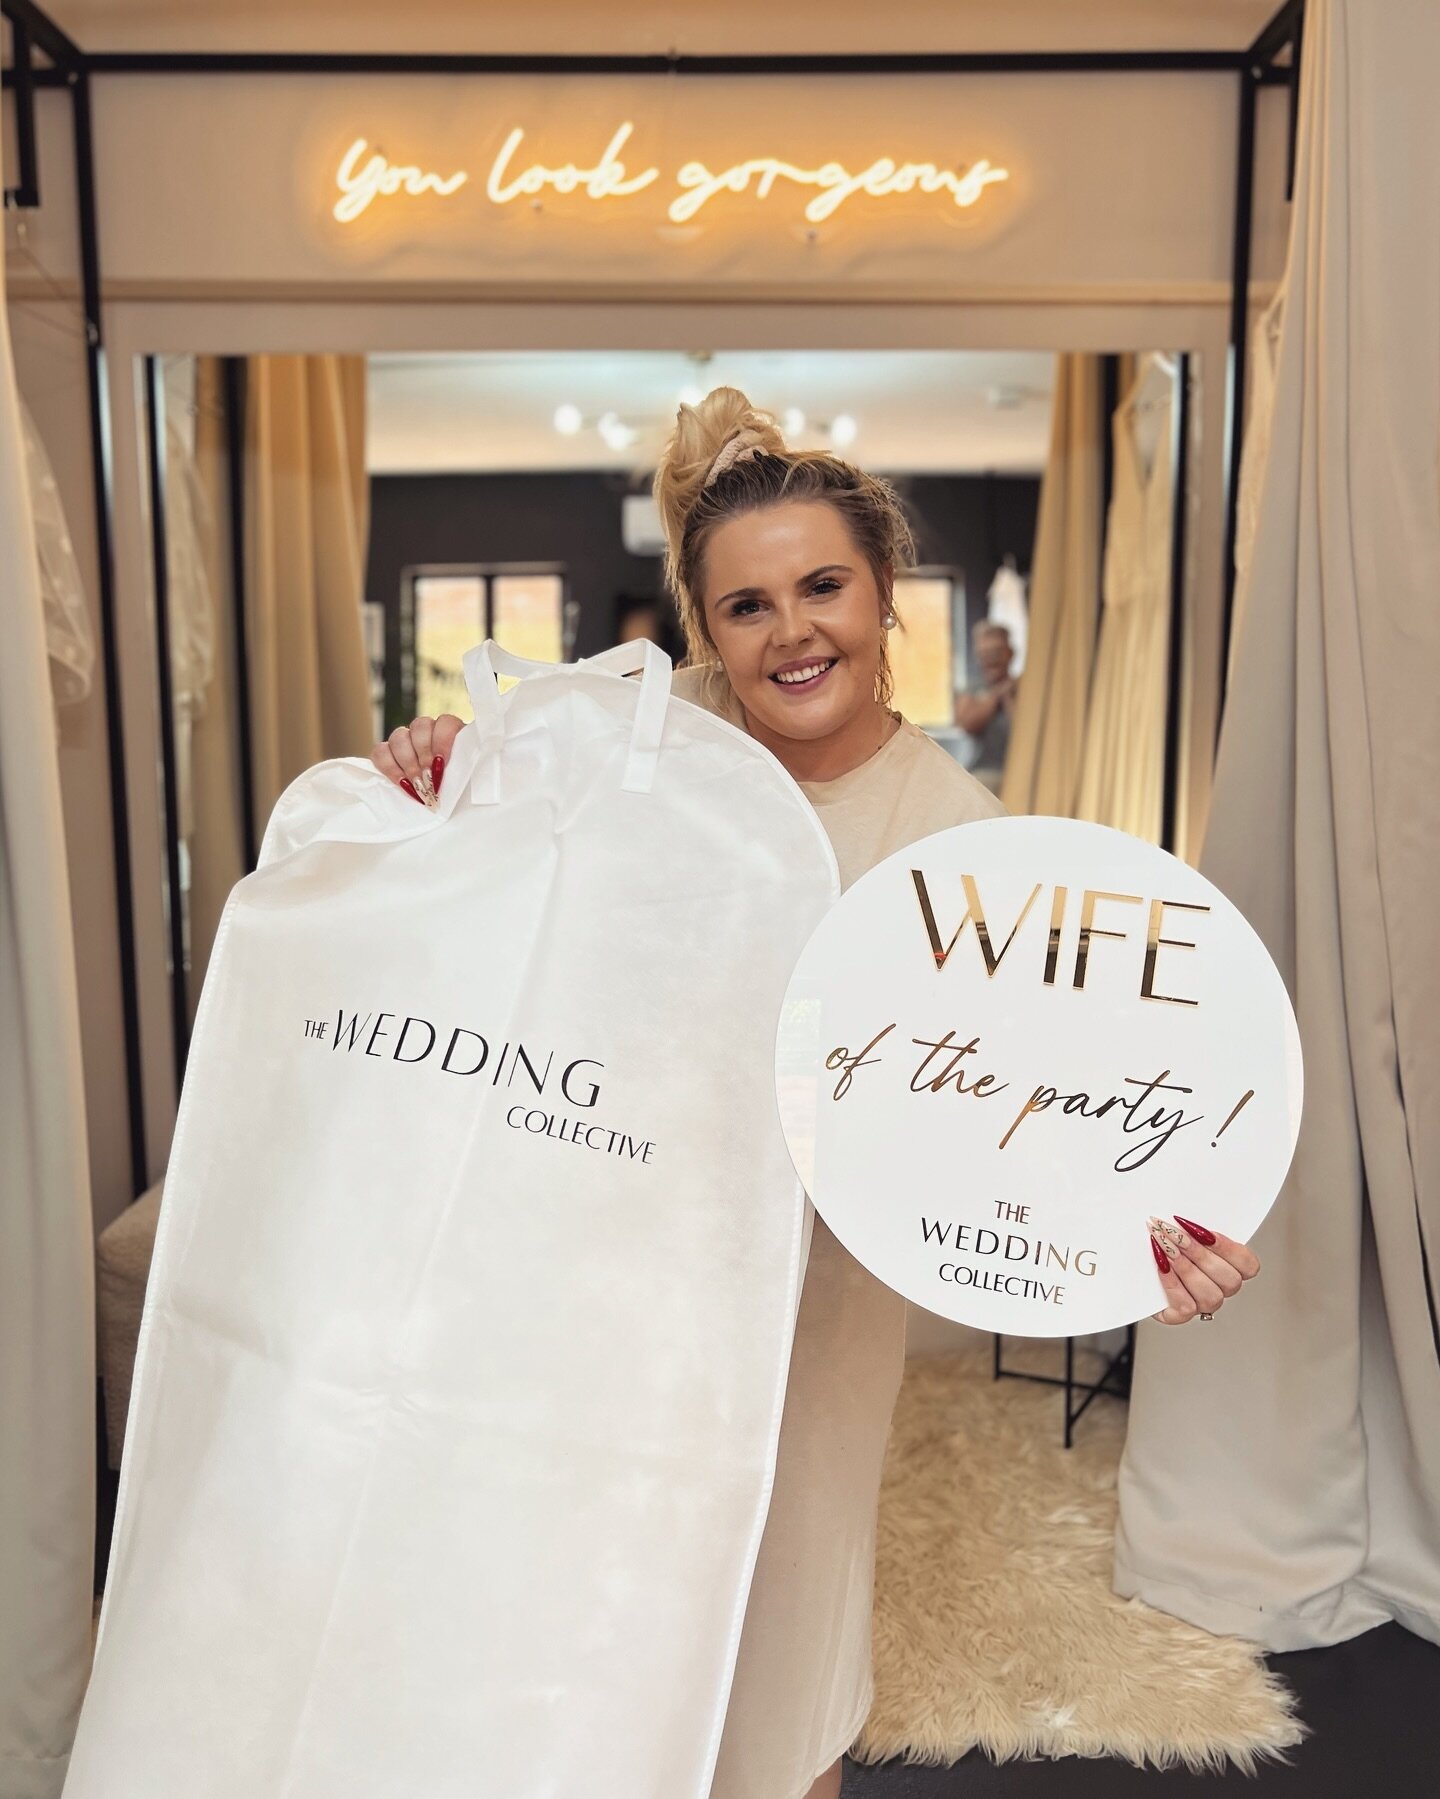 Where to begin with our amazing #TWCrealbride Chelsea?! 

I will never forget at her first wedding dress consultation she took control of her fitting by asking her bridal party to give her a chance to process her feelings and thoughts in each dress b